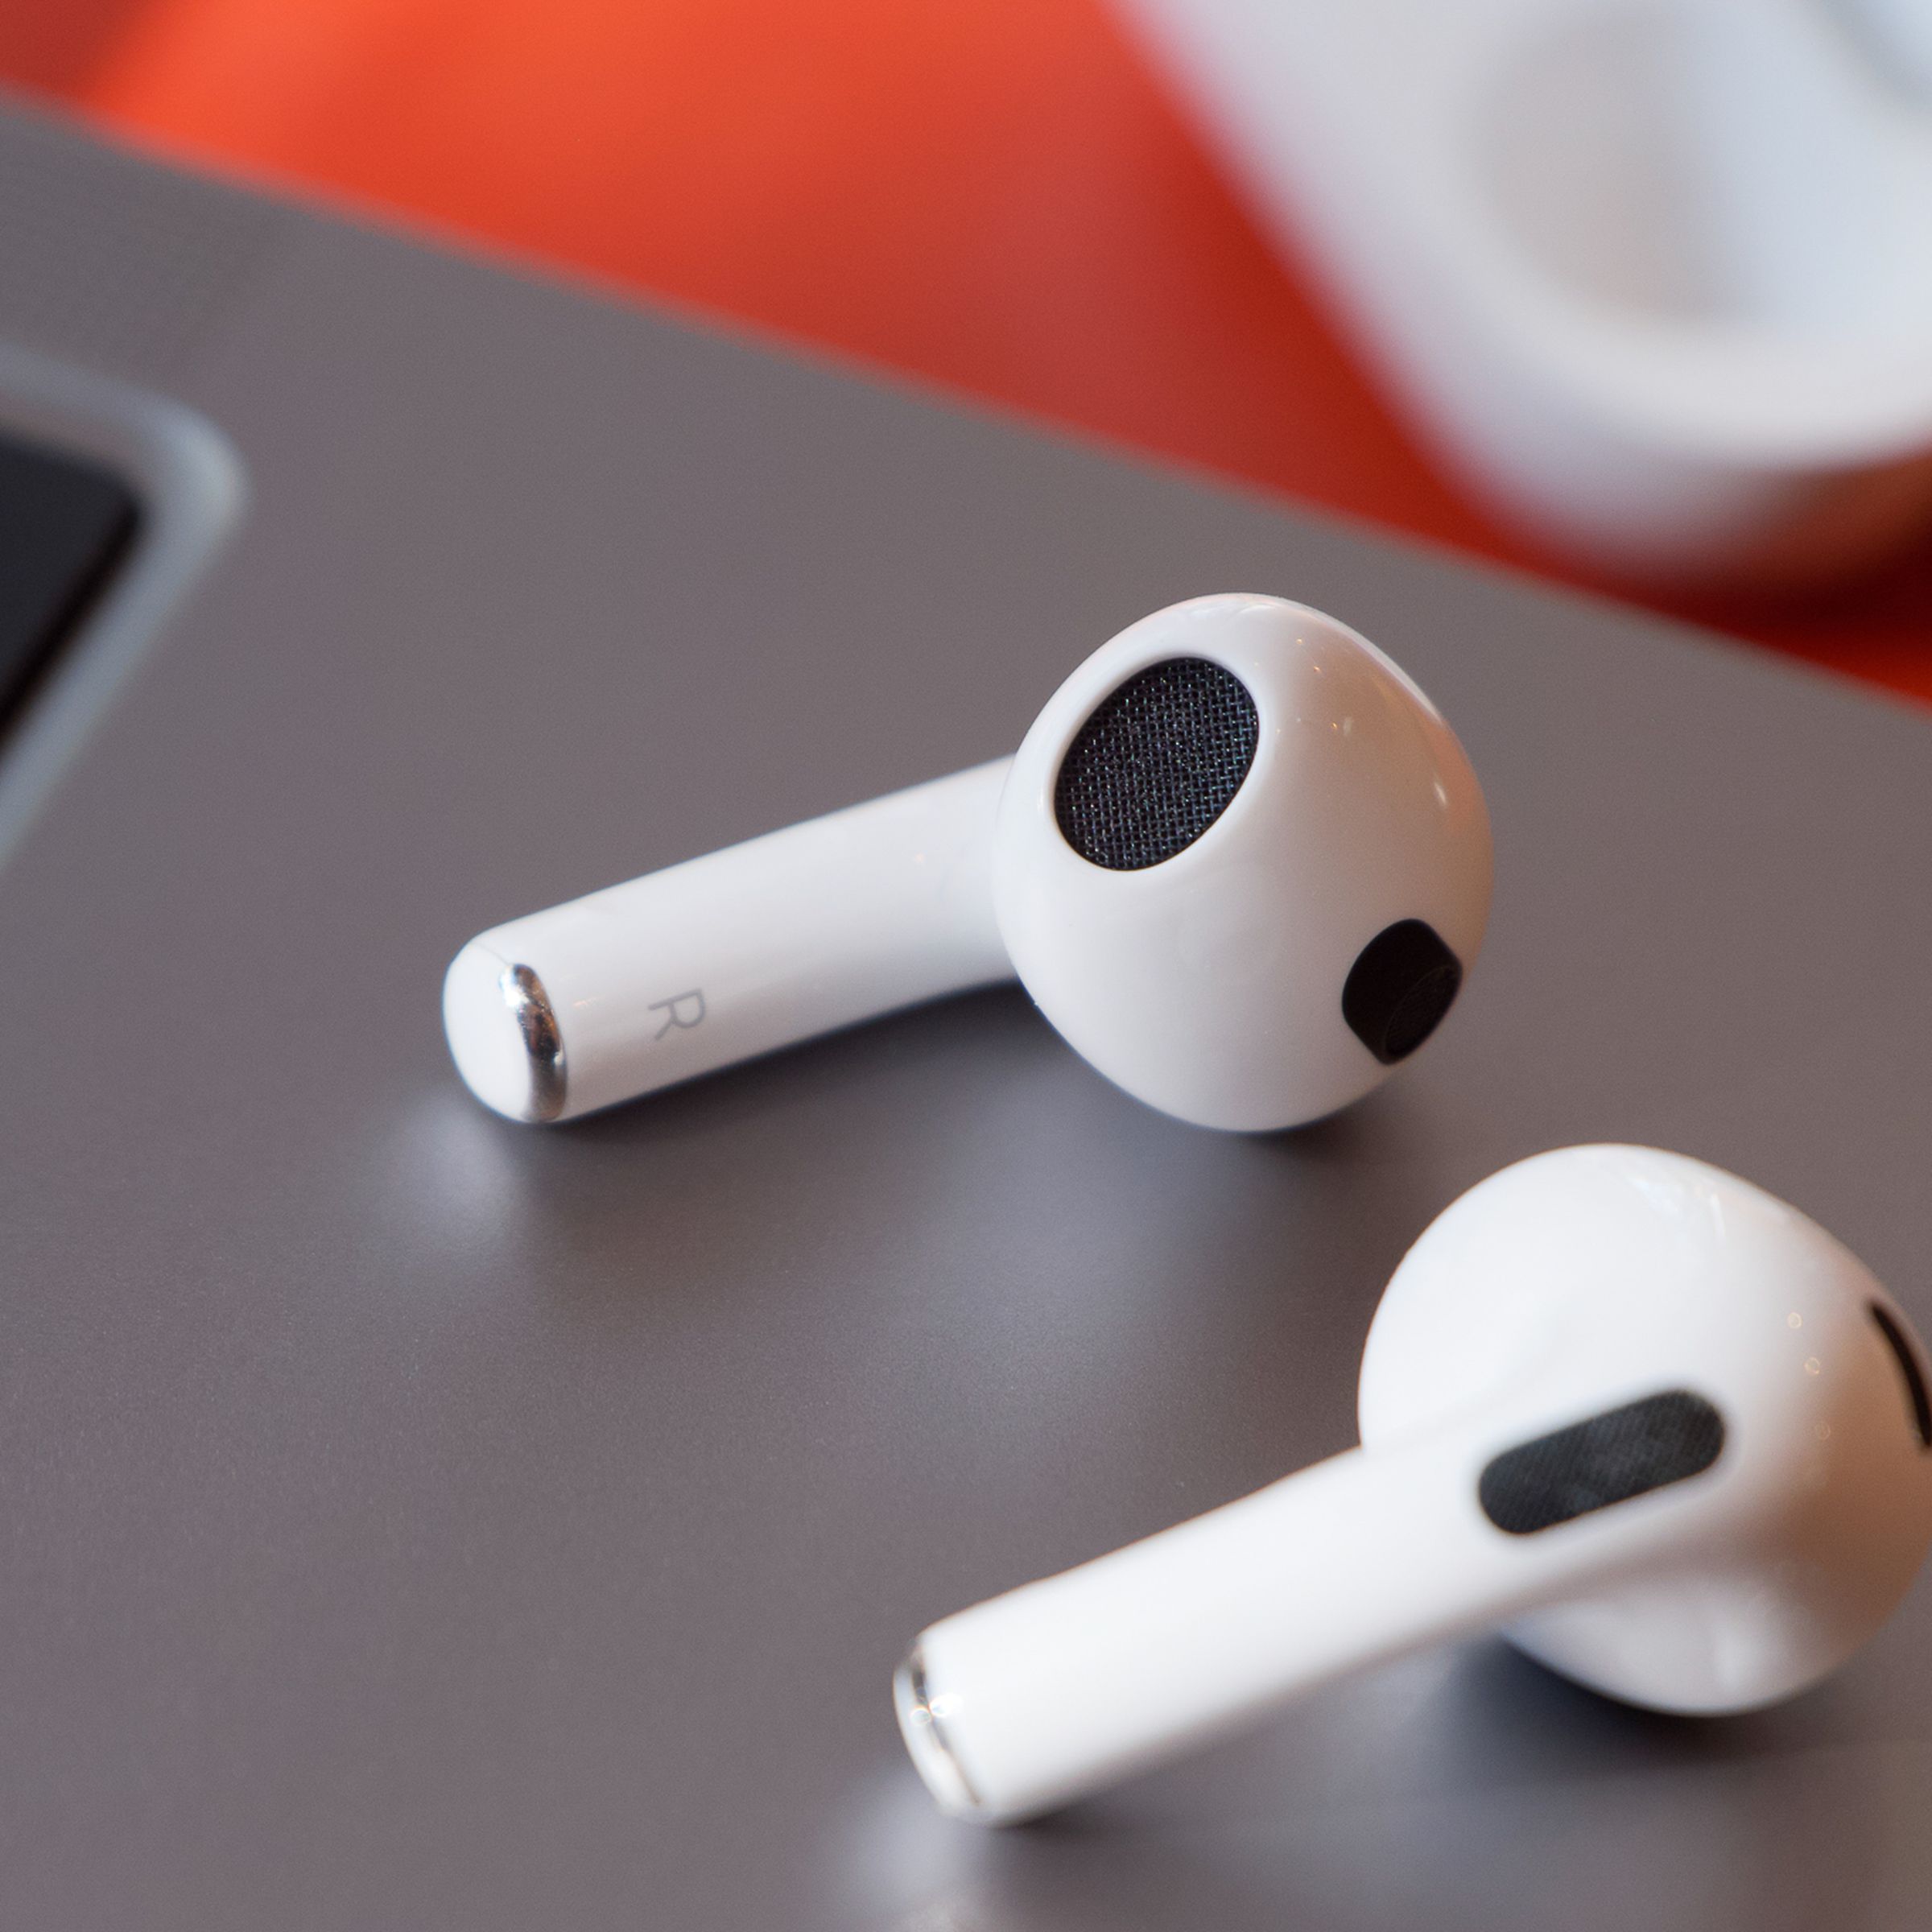 A photo showing the third-gen AirPods